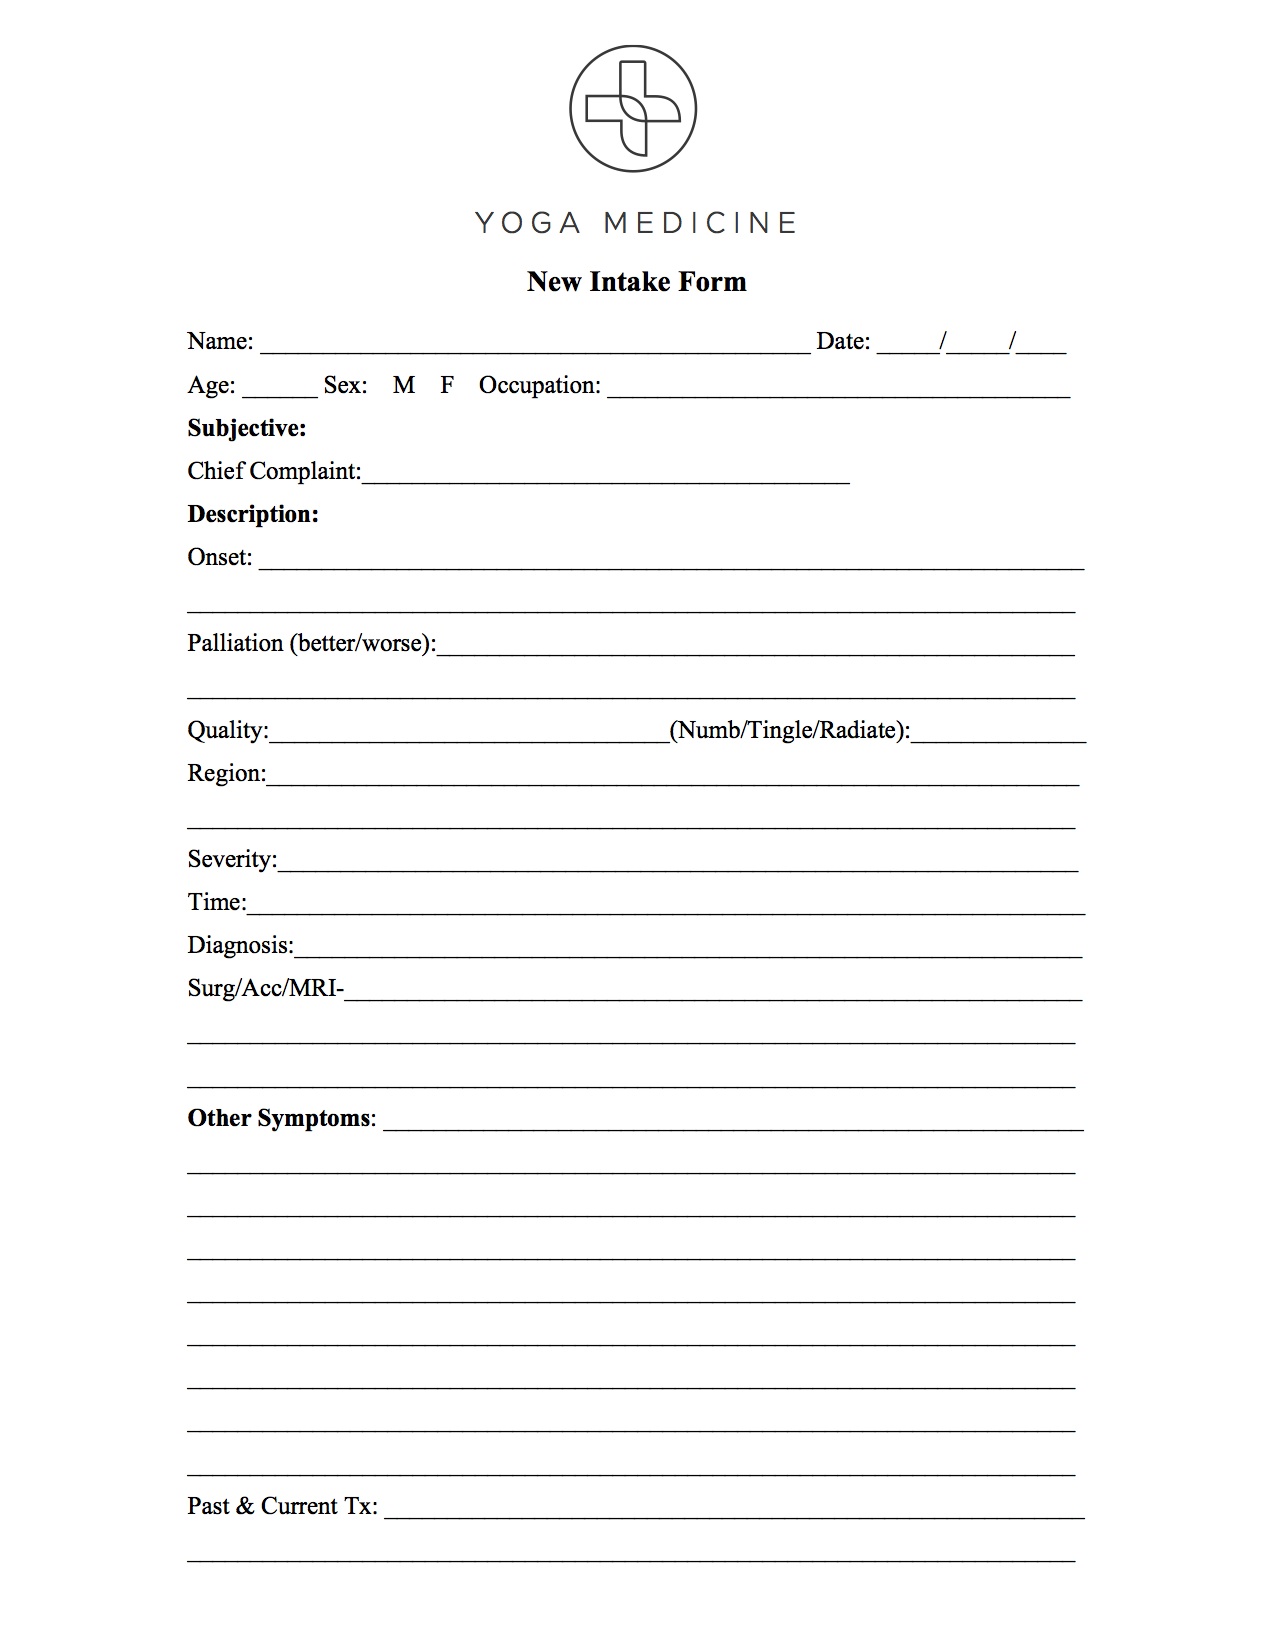 Copy of the yoga medicine intake form. Download it by clicking the link above.